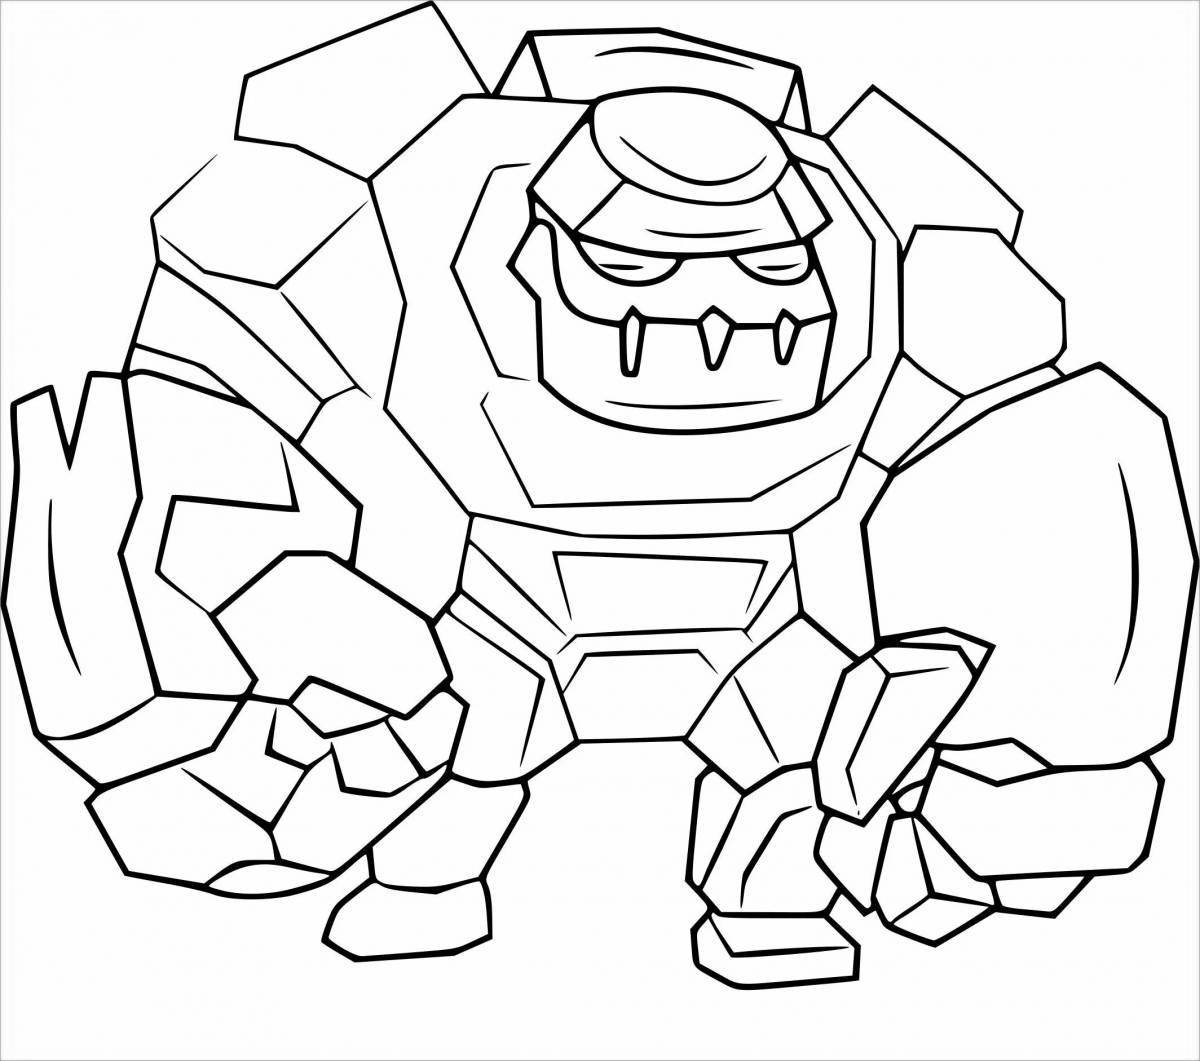 Exciting clash royale arena coloring page